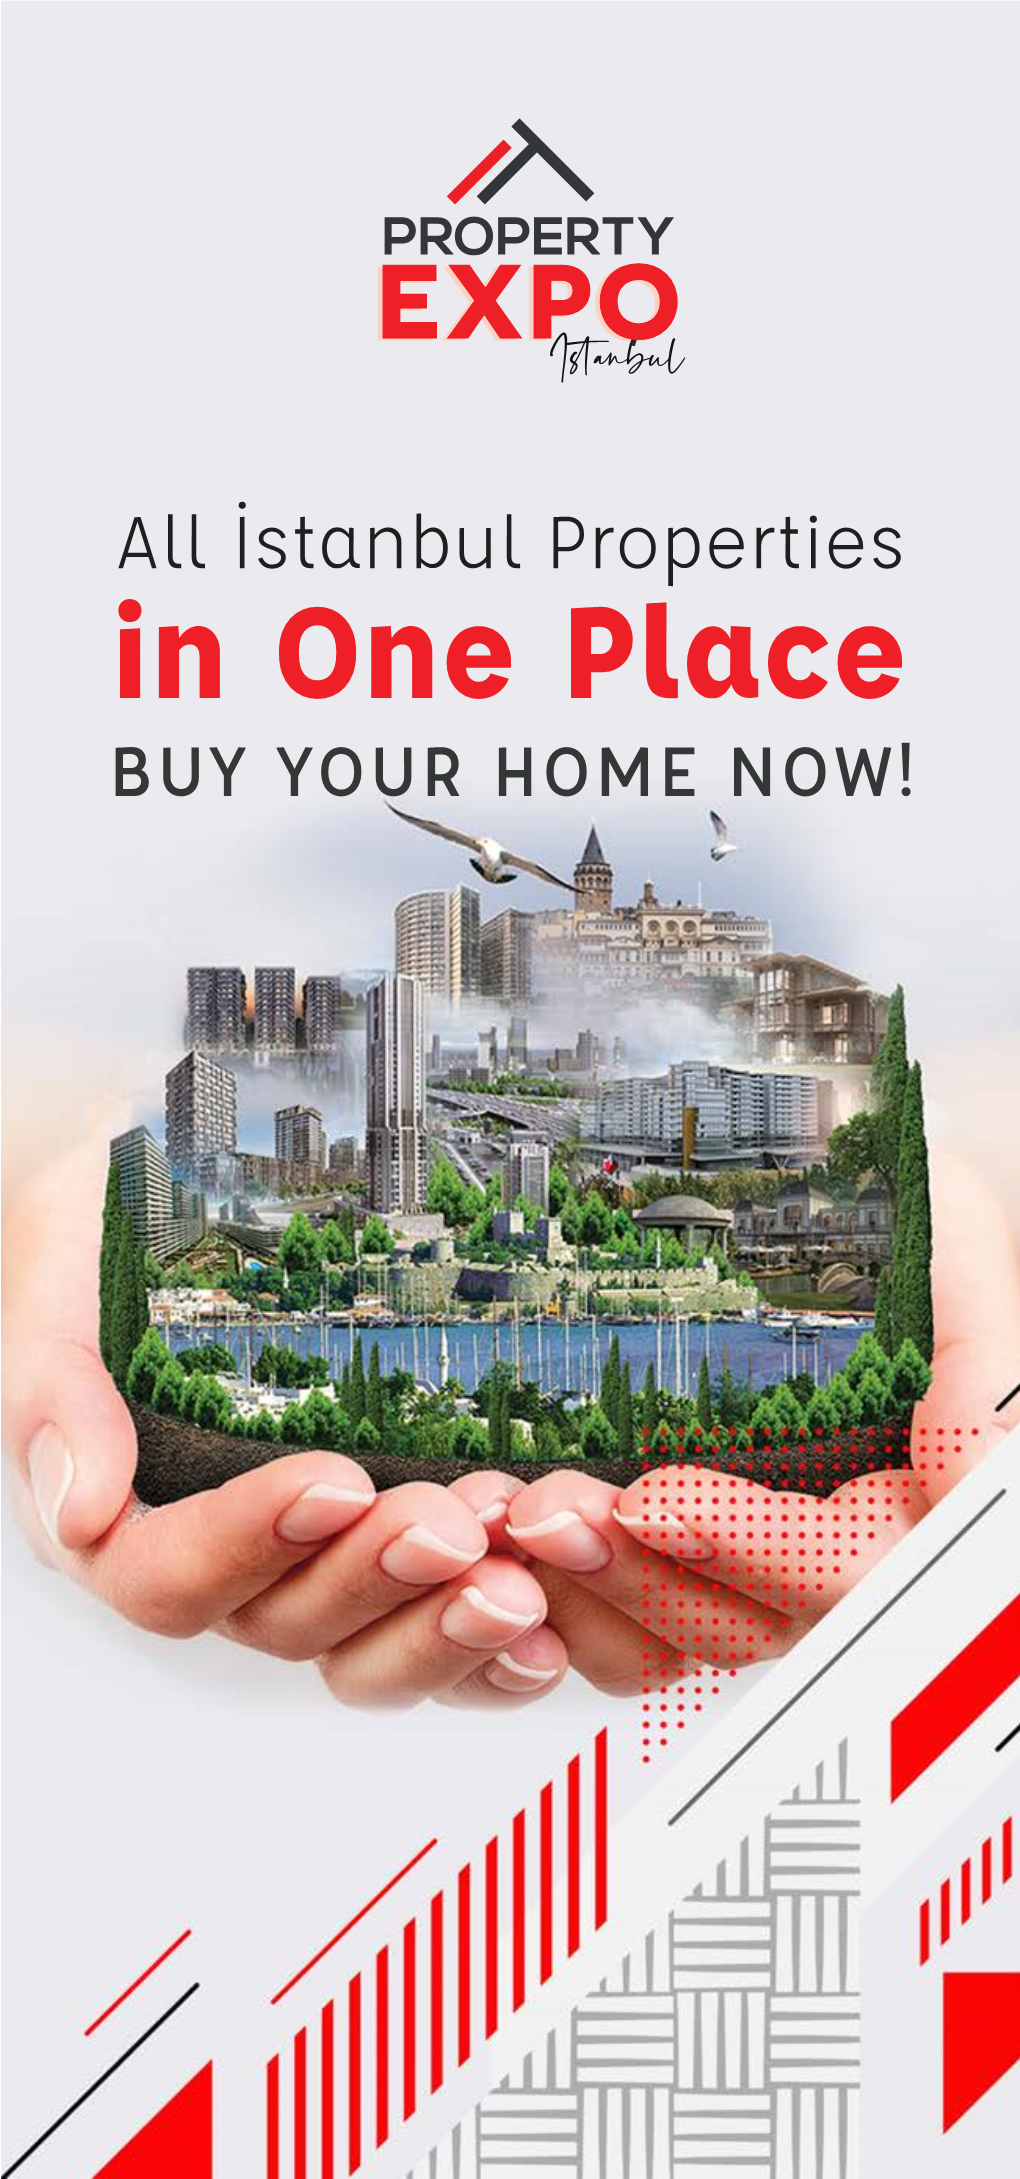 Buy Your Home Now! About Property Expo